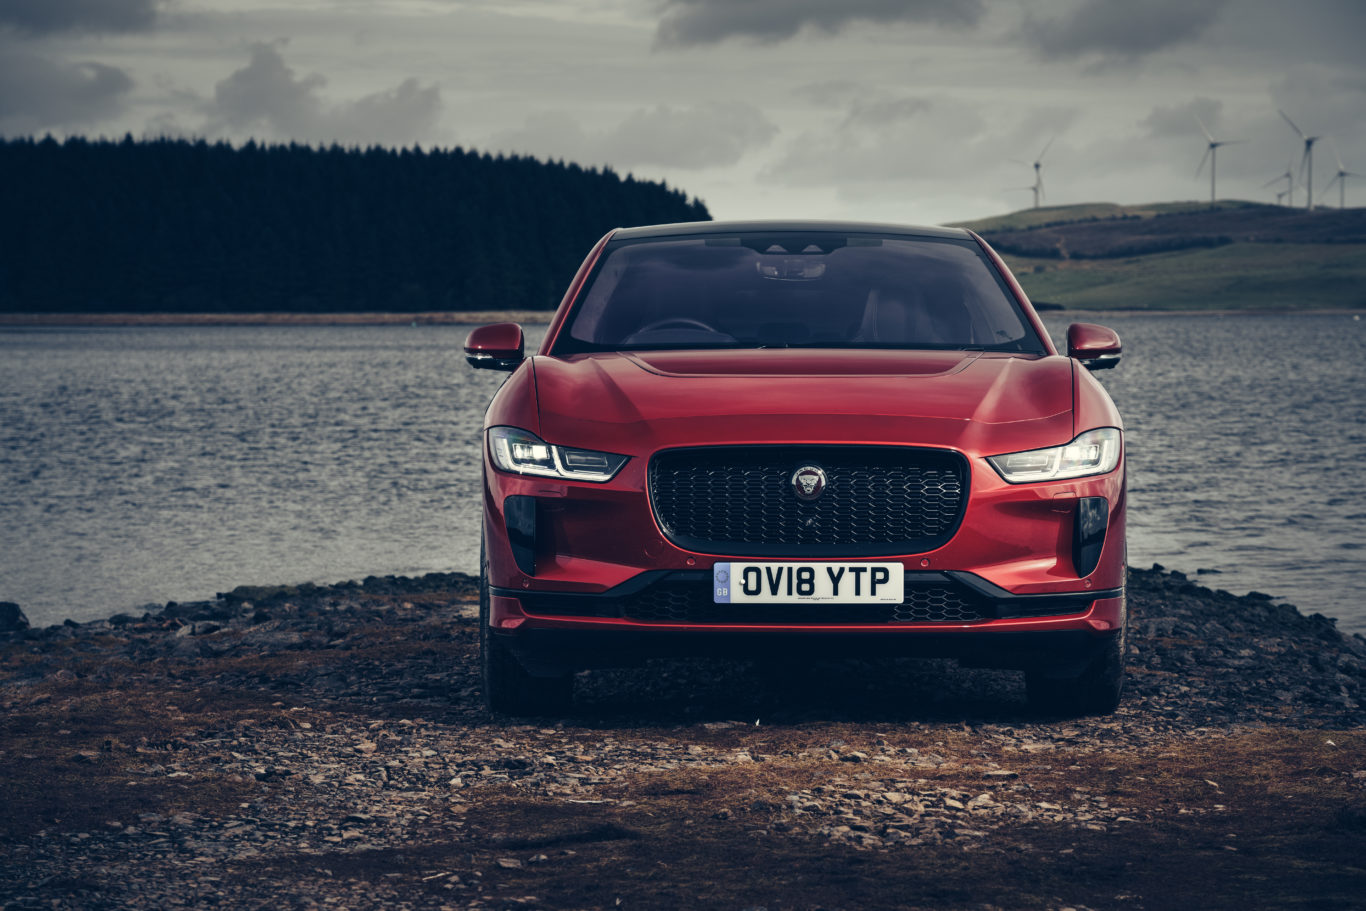 The I-Pace is instantly recognisable as a Jaguar